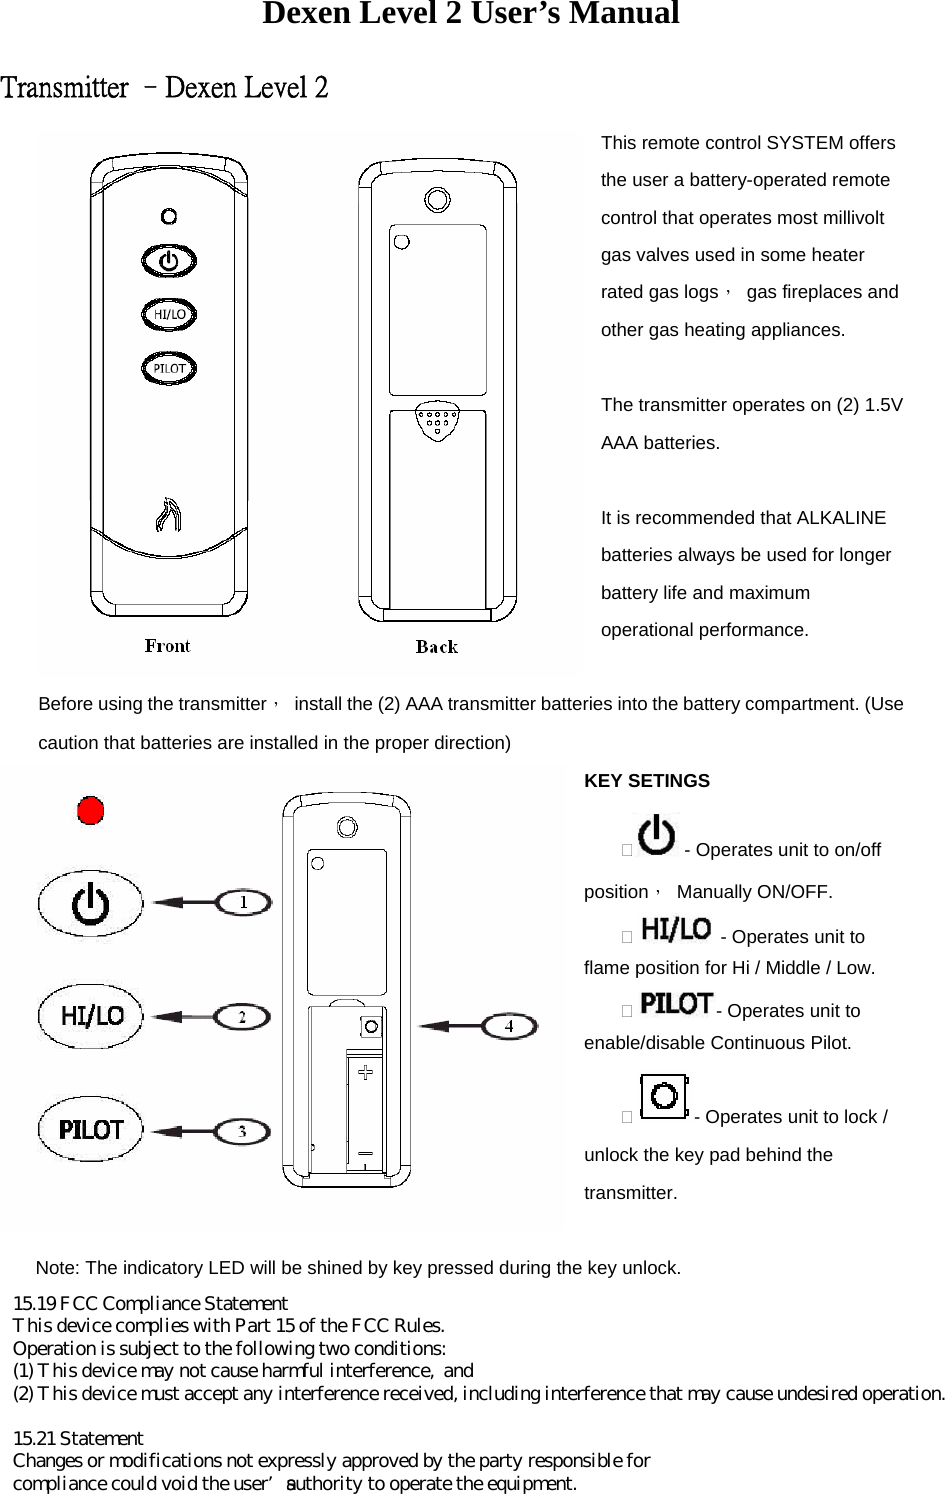 Dexen Level 2 User’s Manual Transmitter –Dexen Level 2 This remote control SYSTEM offers the user a battery-operated remote control that operates most millivolt gas valves used in some heater rated gas logs，  gas fireplaces and other gas heating appliances.  The transmitter operates on (2) 1.5V AAA batteries.  It is recommended that ALKALINE batteries always be used for longer battery life and maximum operational performance.  Before using the transmitter，  install the (2) AAA transmitter batteries into the battery compartment. (Use caution that batteries are installed in the proper direction) KEY SETINGS  - Operates unit to on/off position， Manually ON/OFF.     - Operates unit to flame position for Hi / Middle / Low.   - Operates unit to enable/disable Continuous Pilot.   - Operates unit to lock / unlock the key pad behind the transmitter.  Note: The indicatory LED will be shined by key pressed during the key unlock.     15.19 FCC Compliance StatementThis device complies with Part 15 of the FCC Rules.Operation is subject to the following two conditions:(1) This device may not cause harmful interference,  and(2) This device must accept any interference received, including interference that may cause undesired operation.15.21 StatementChanges or modifications not expressly approved by the party responsible forcompliance could void the user’s authority to operate the equipment.